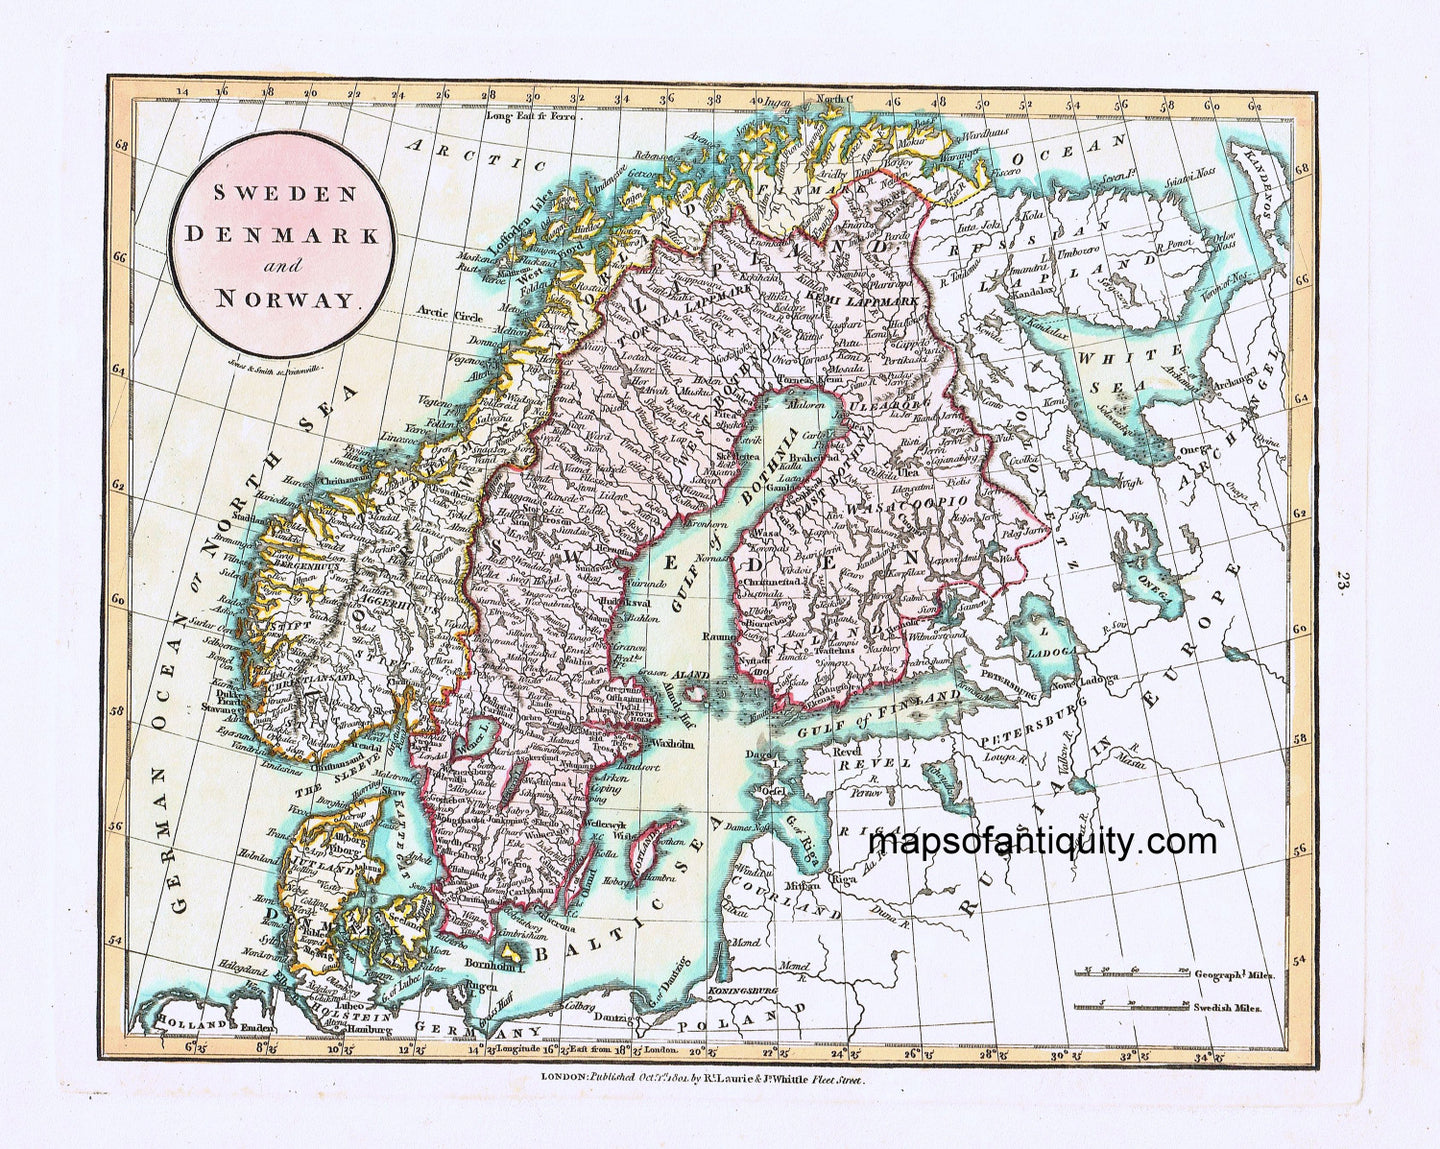 Hand-Colored-Engraved-Antique-Map-Sweden-Denmark-and-Norway-Europe-Scandinavia-1801-Laurie-and-Whittle-Maps-Of-Antiquity